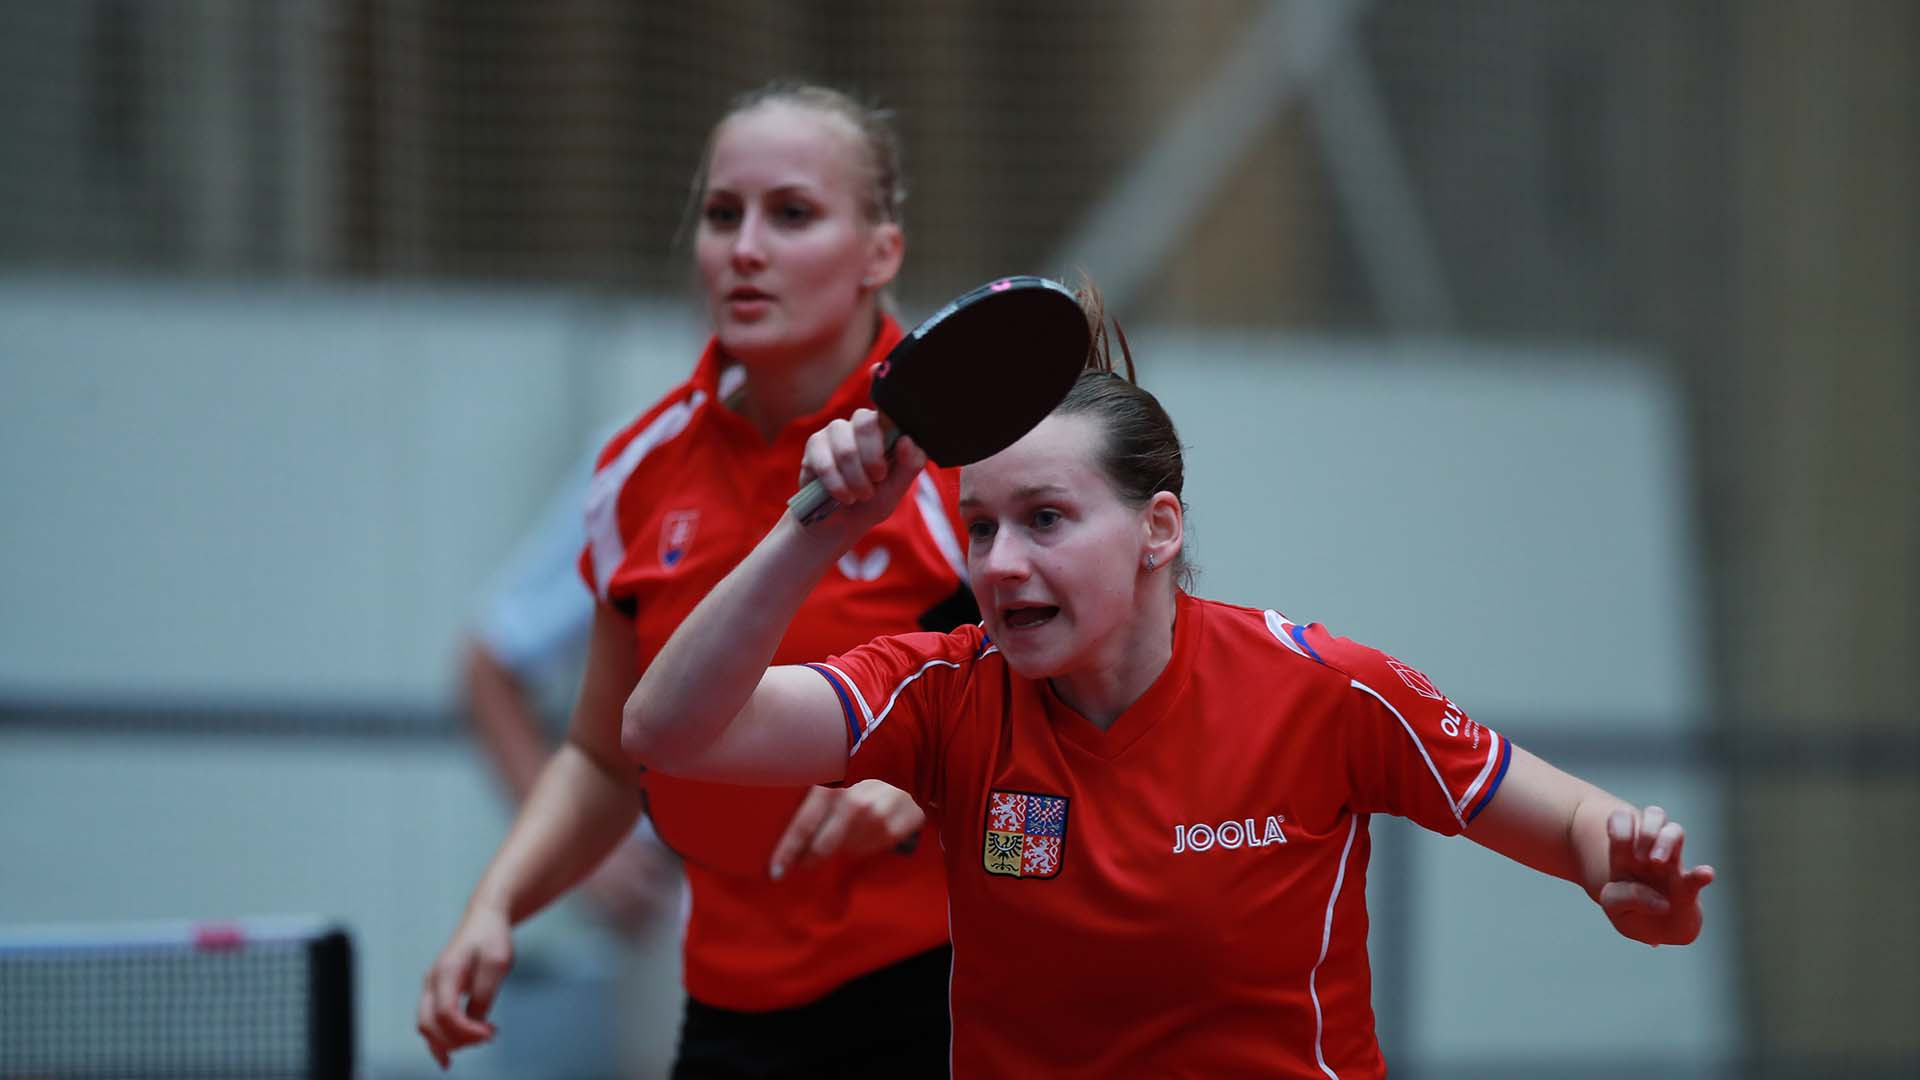 Barbora Balážová from Slovakia and Hana Matelová from the Czech Republic, the fourth seeds, lost in what was the only upset of the day in the women's doubles at the ITTF European Championships ©ITTF